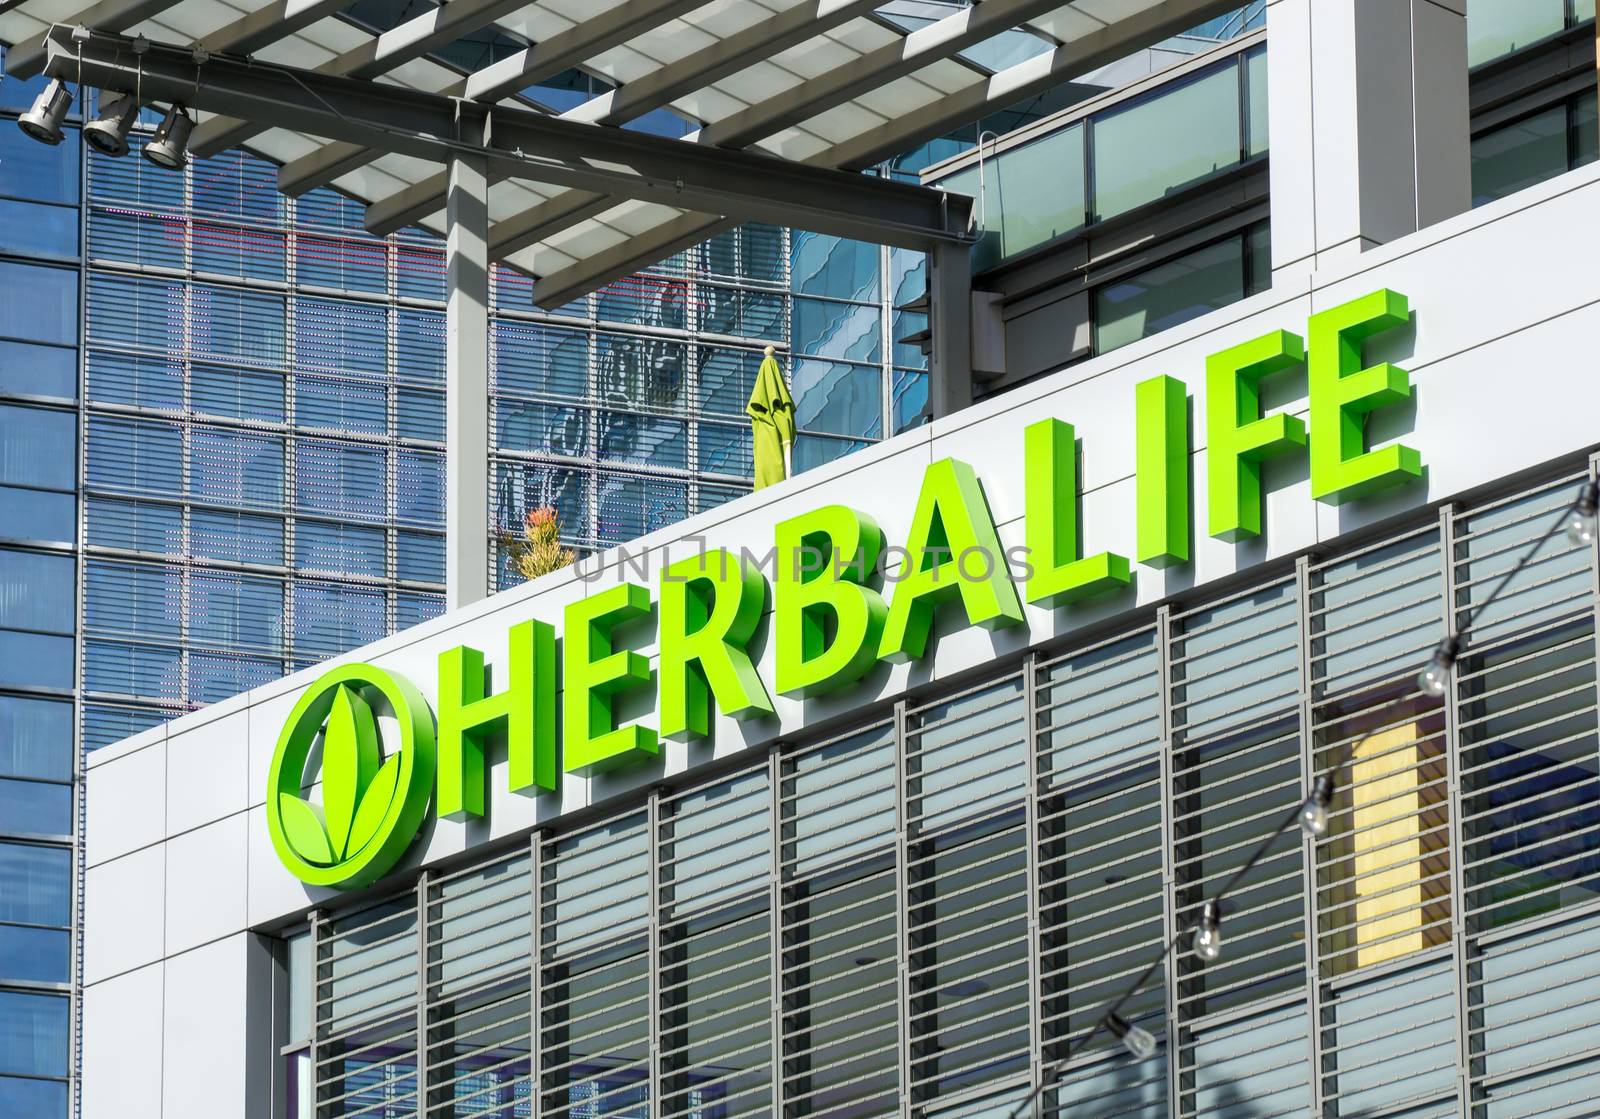 Herbalife Emblem and Logo by wolterk